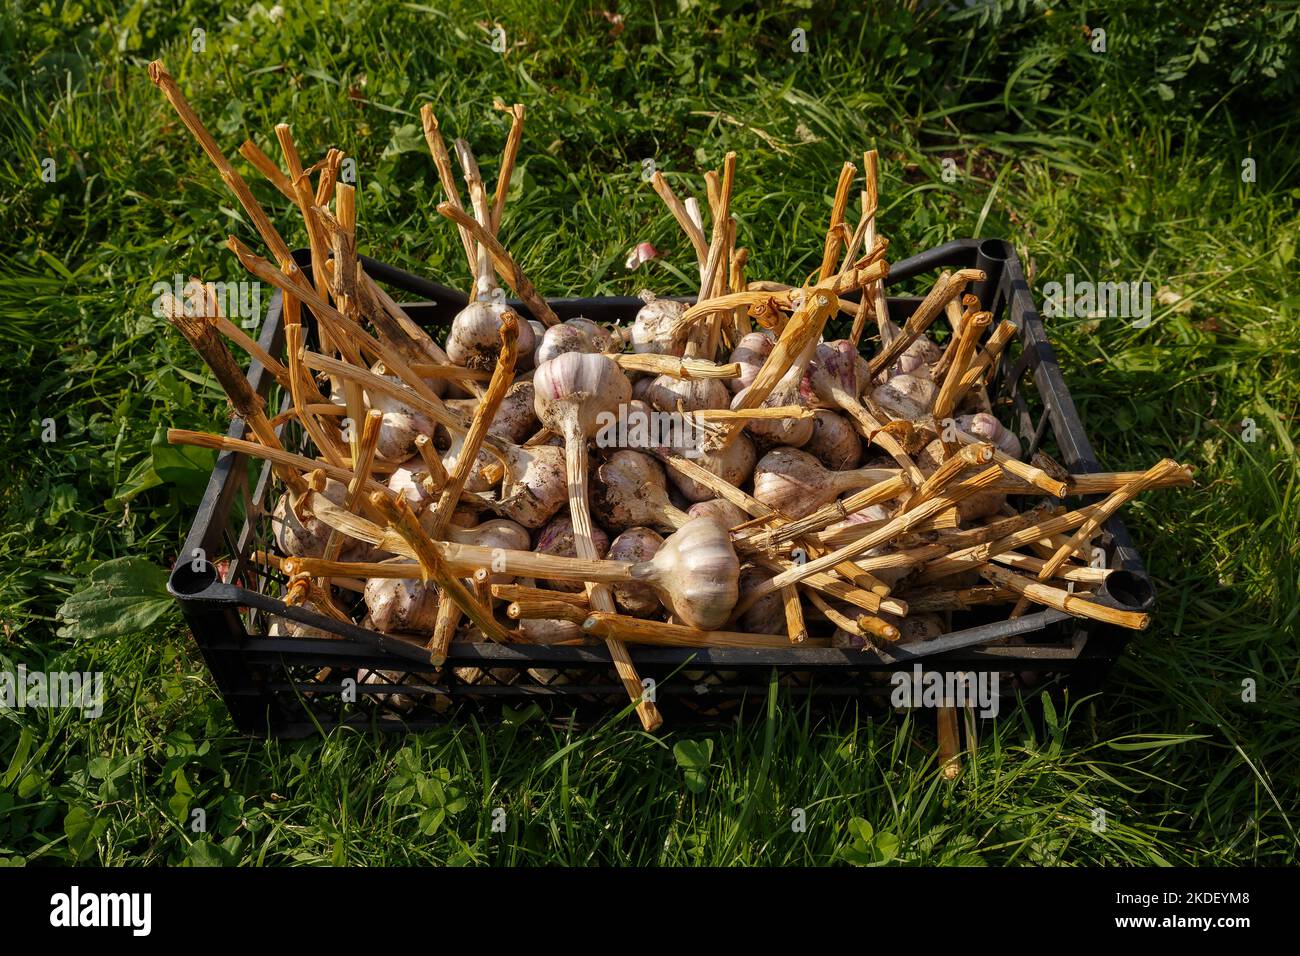 Garlic harvest in a plastic box. Fresh organic garlic in a black container on green grass. Stock Photo